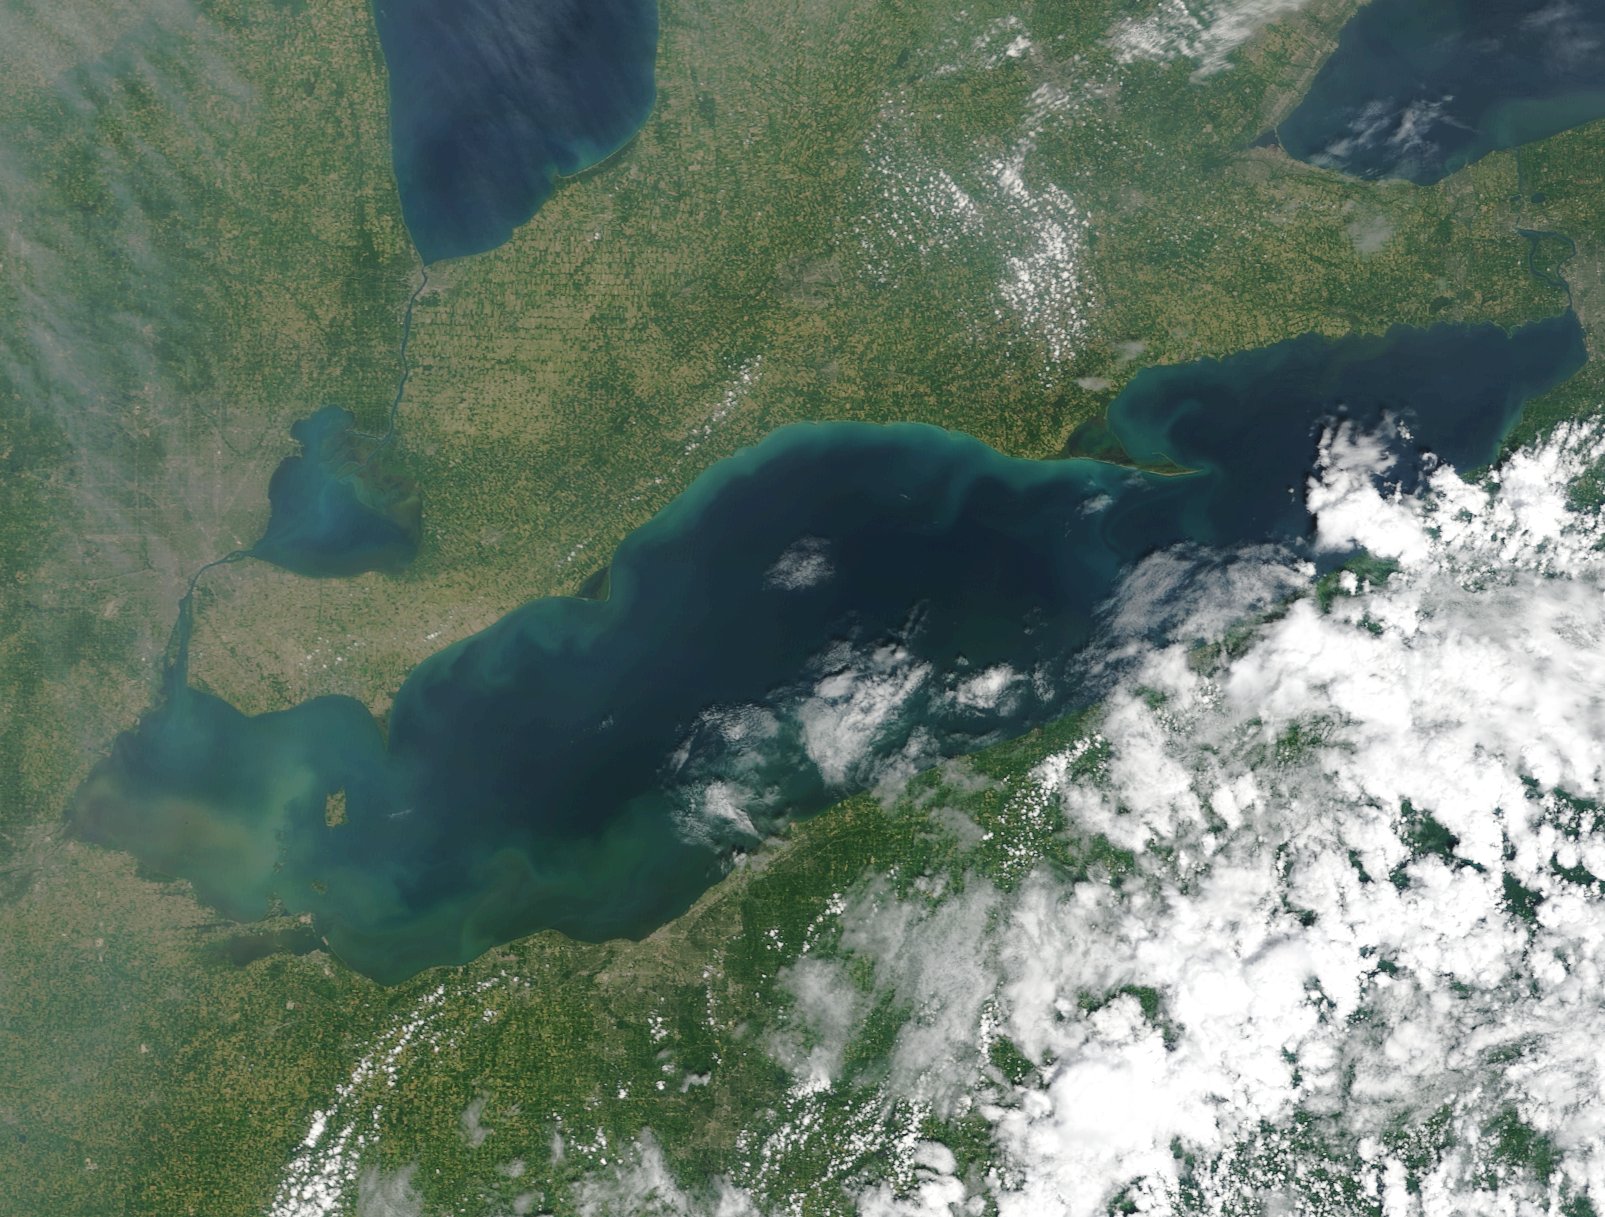 A satellite view of Lake Erie on July 6, 2015. Credit: NOAA/MODIS